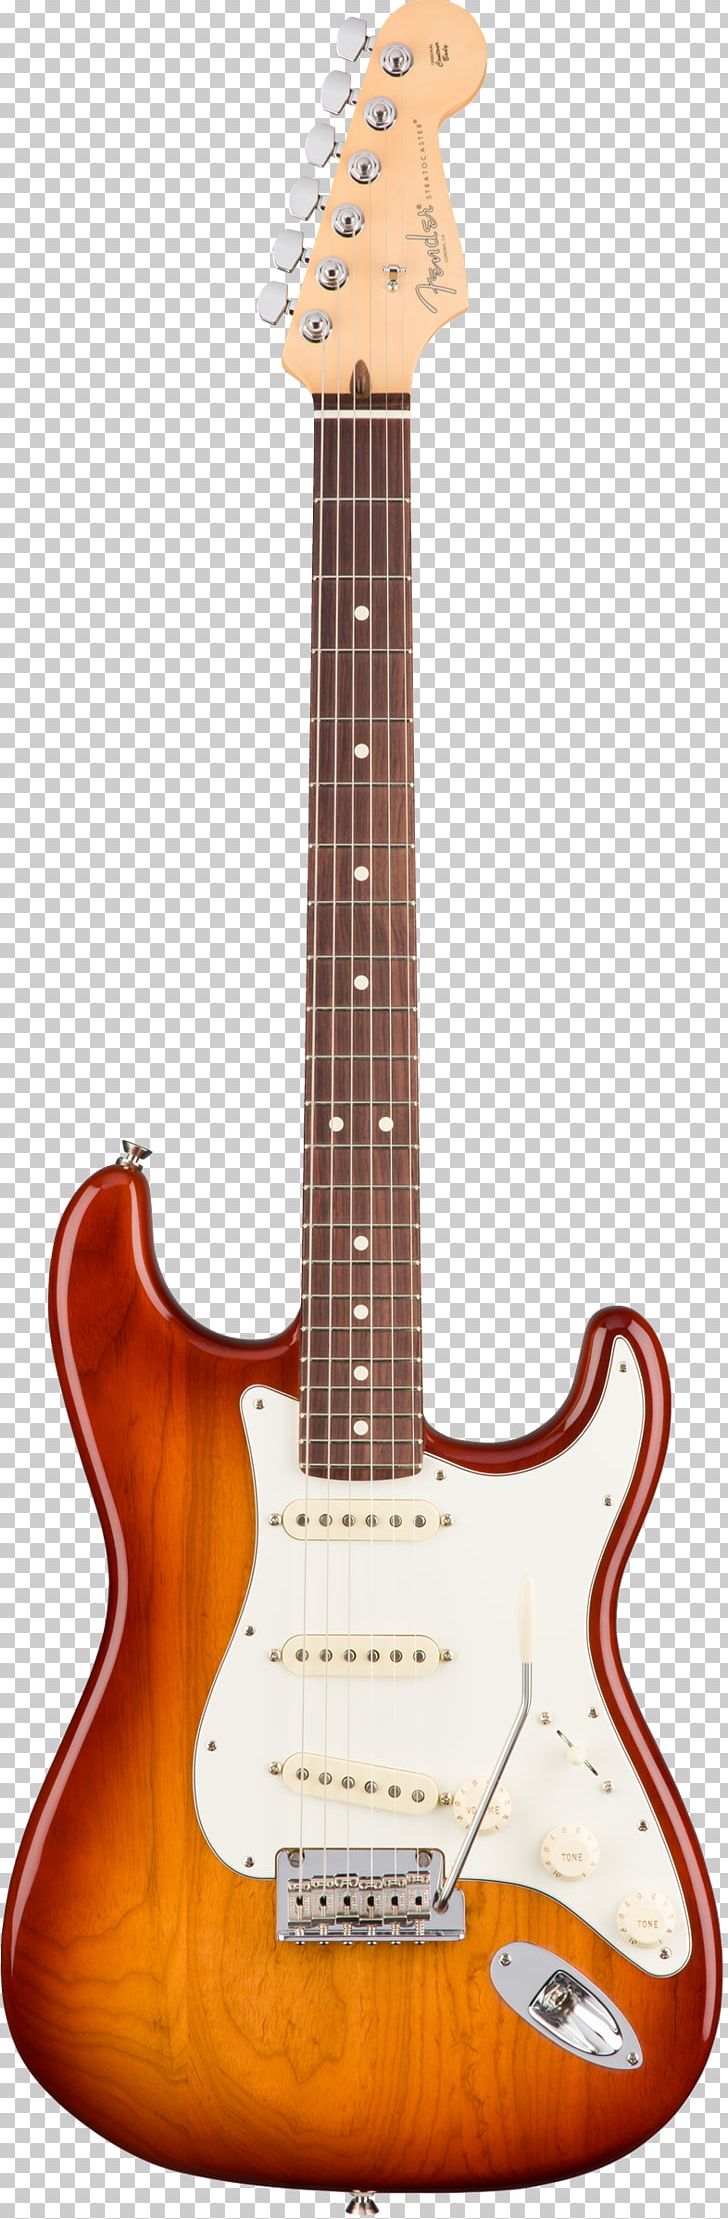 Fender Stratocaster Fender Musical Instruments Corporation Electric Guitar Fender Bullet Fender American Deluxe Series PNG, Clipart, Acoustic Electric Guitar, Guitar, Guitar Accessory, Jazz Guitarist, Musical Instrument Free PNG Download